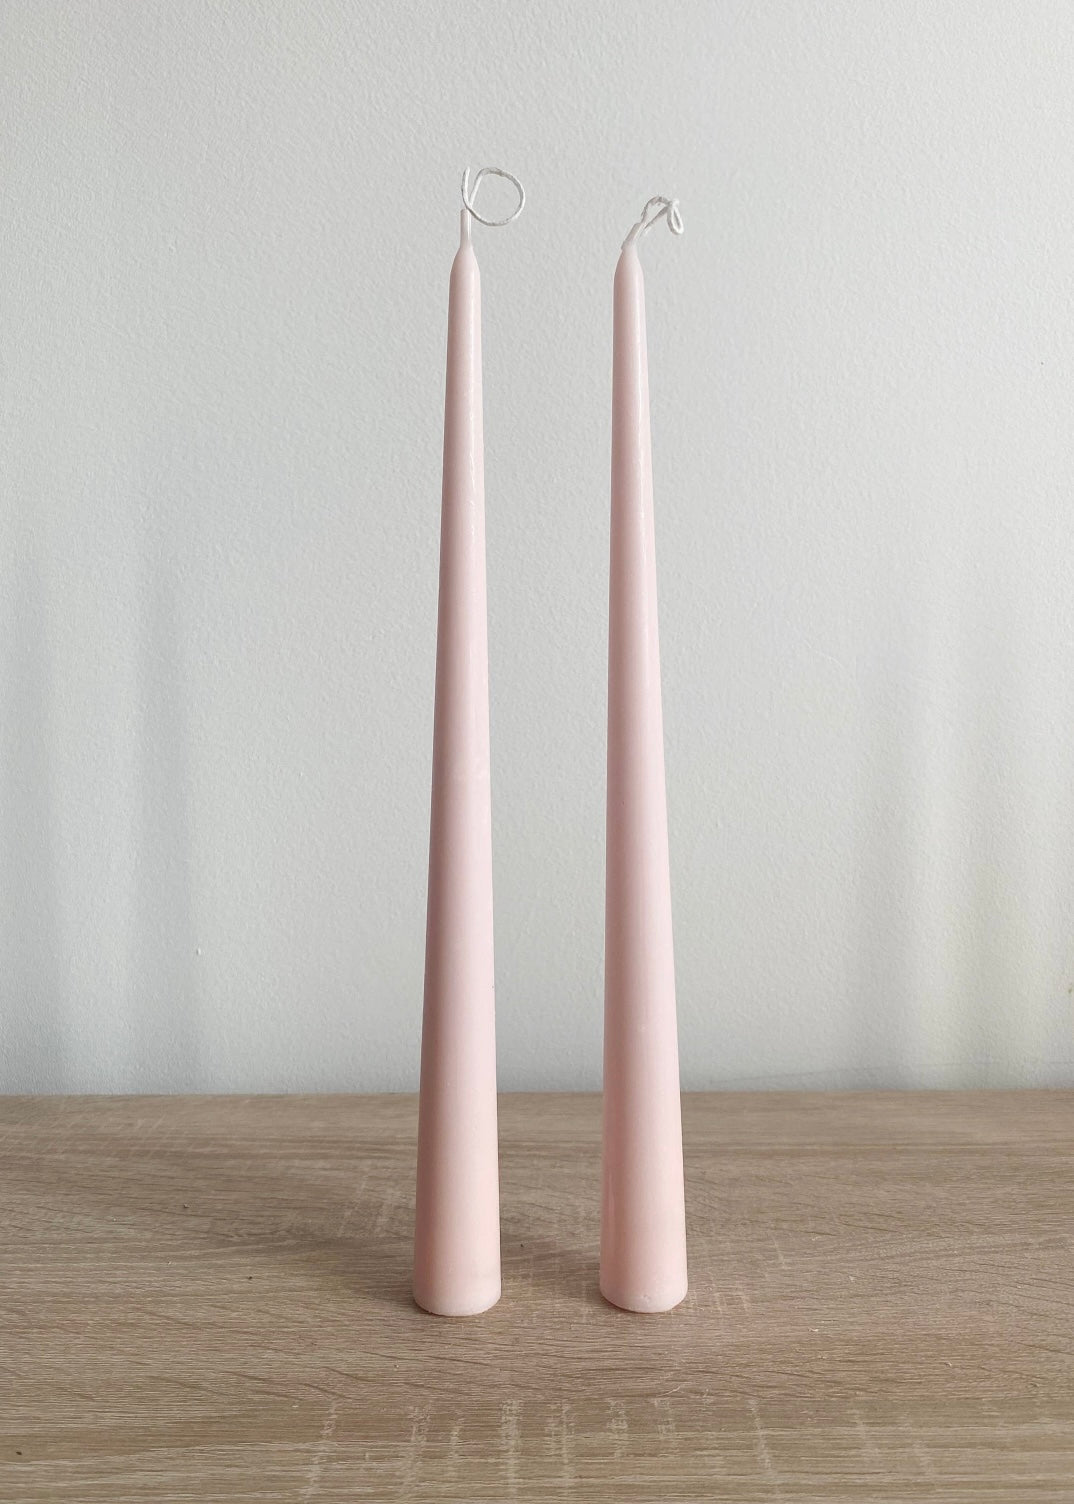 Baby Pink Tall Tapered Candlesticks Set